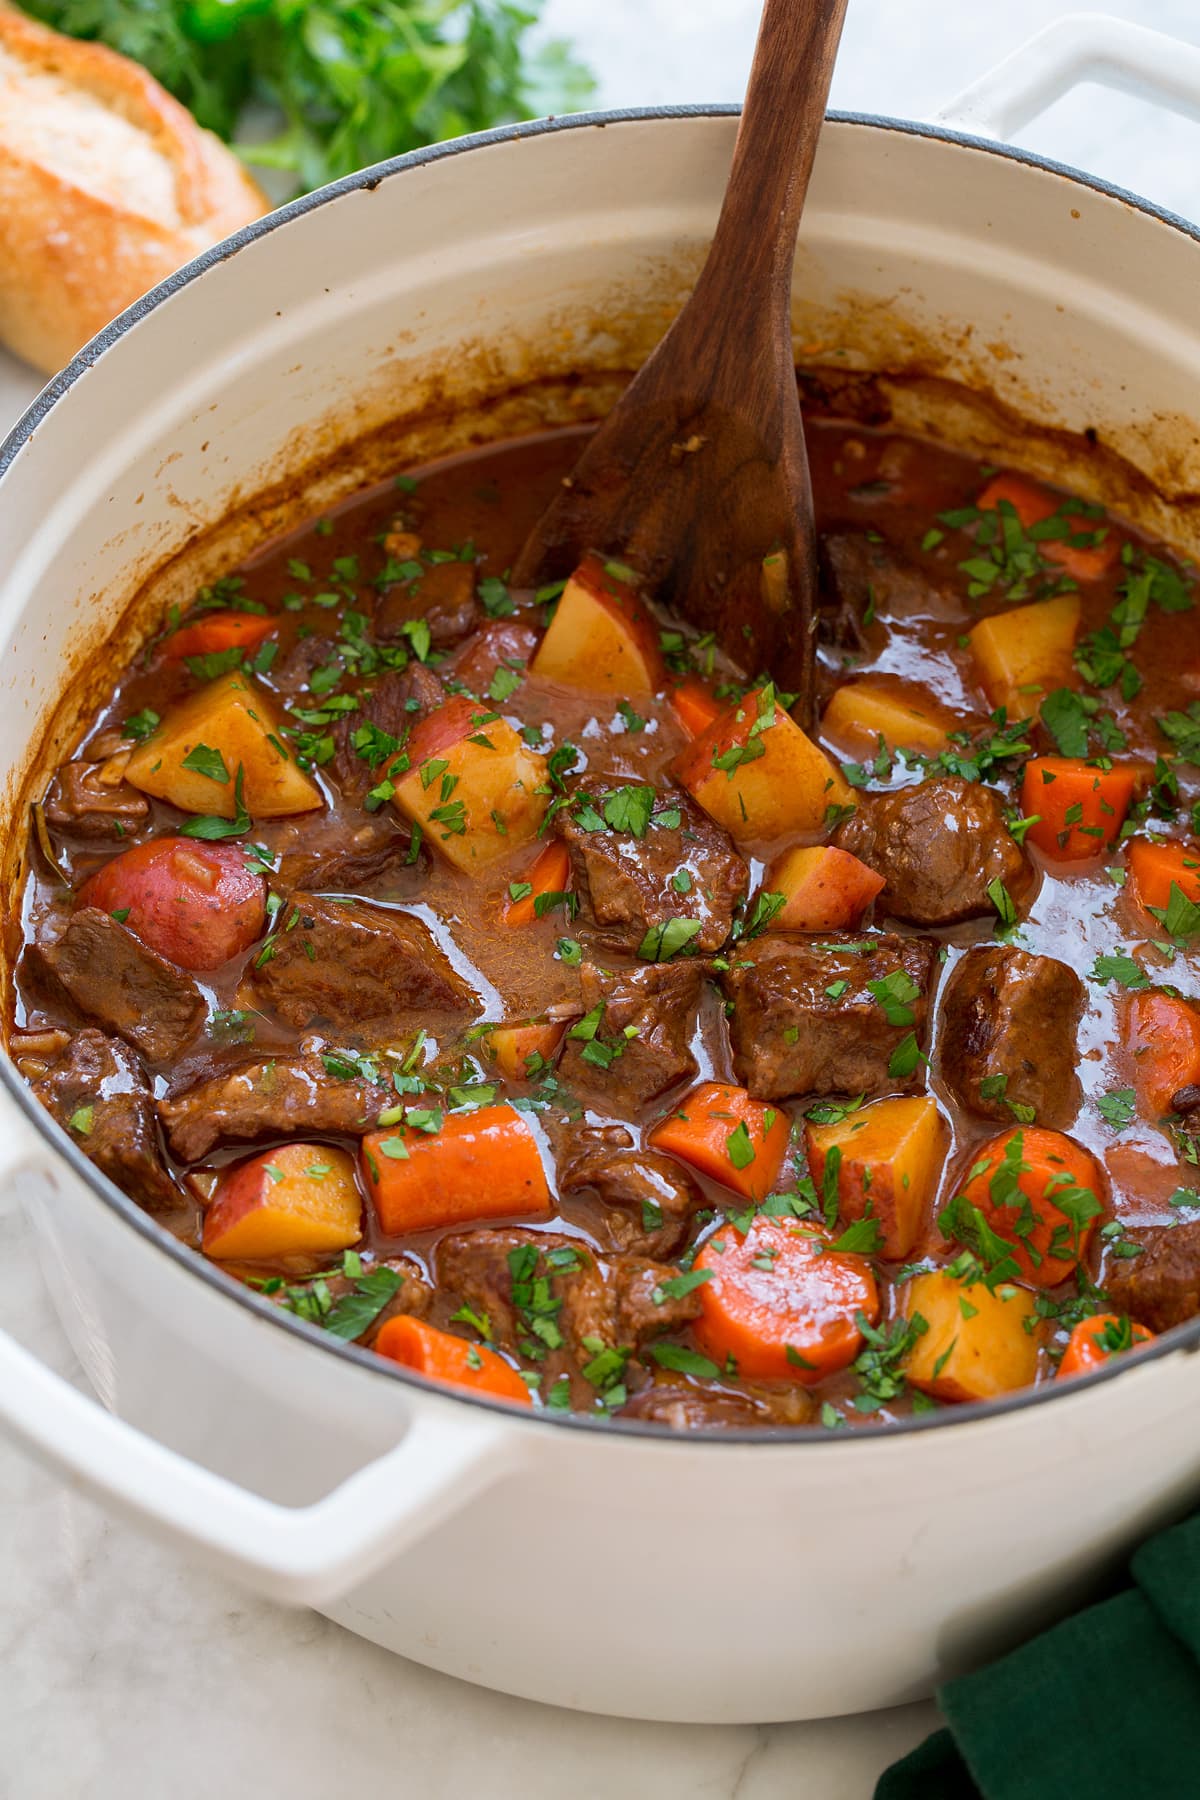 Beef stew with potatoes, carrots and chuck roast in a pot with a wooden spoon, it is shown from the side.